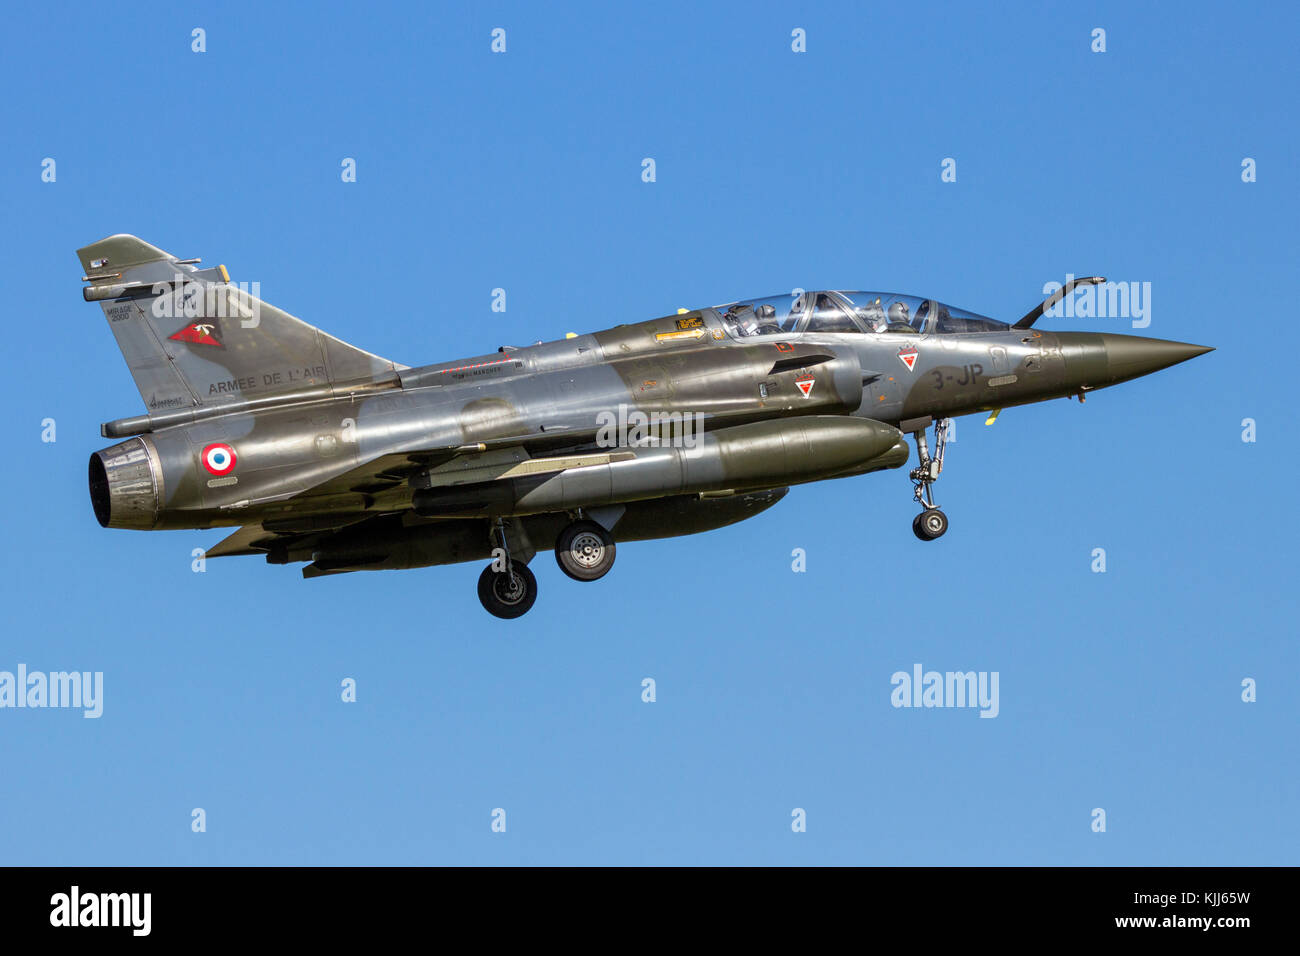 LEEUWARDEN, THE NETHERLANDS - APR 21, 2016: French Air Force Dassault Mirage 2000D jet fighter plane from Escadron de Chasse 2/3 landing on Leeuwarden Stock Photo